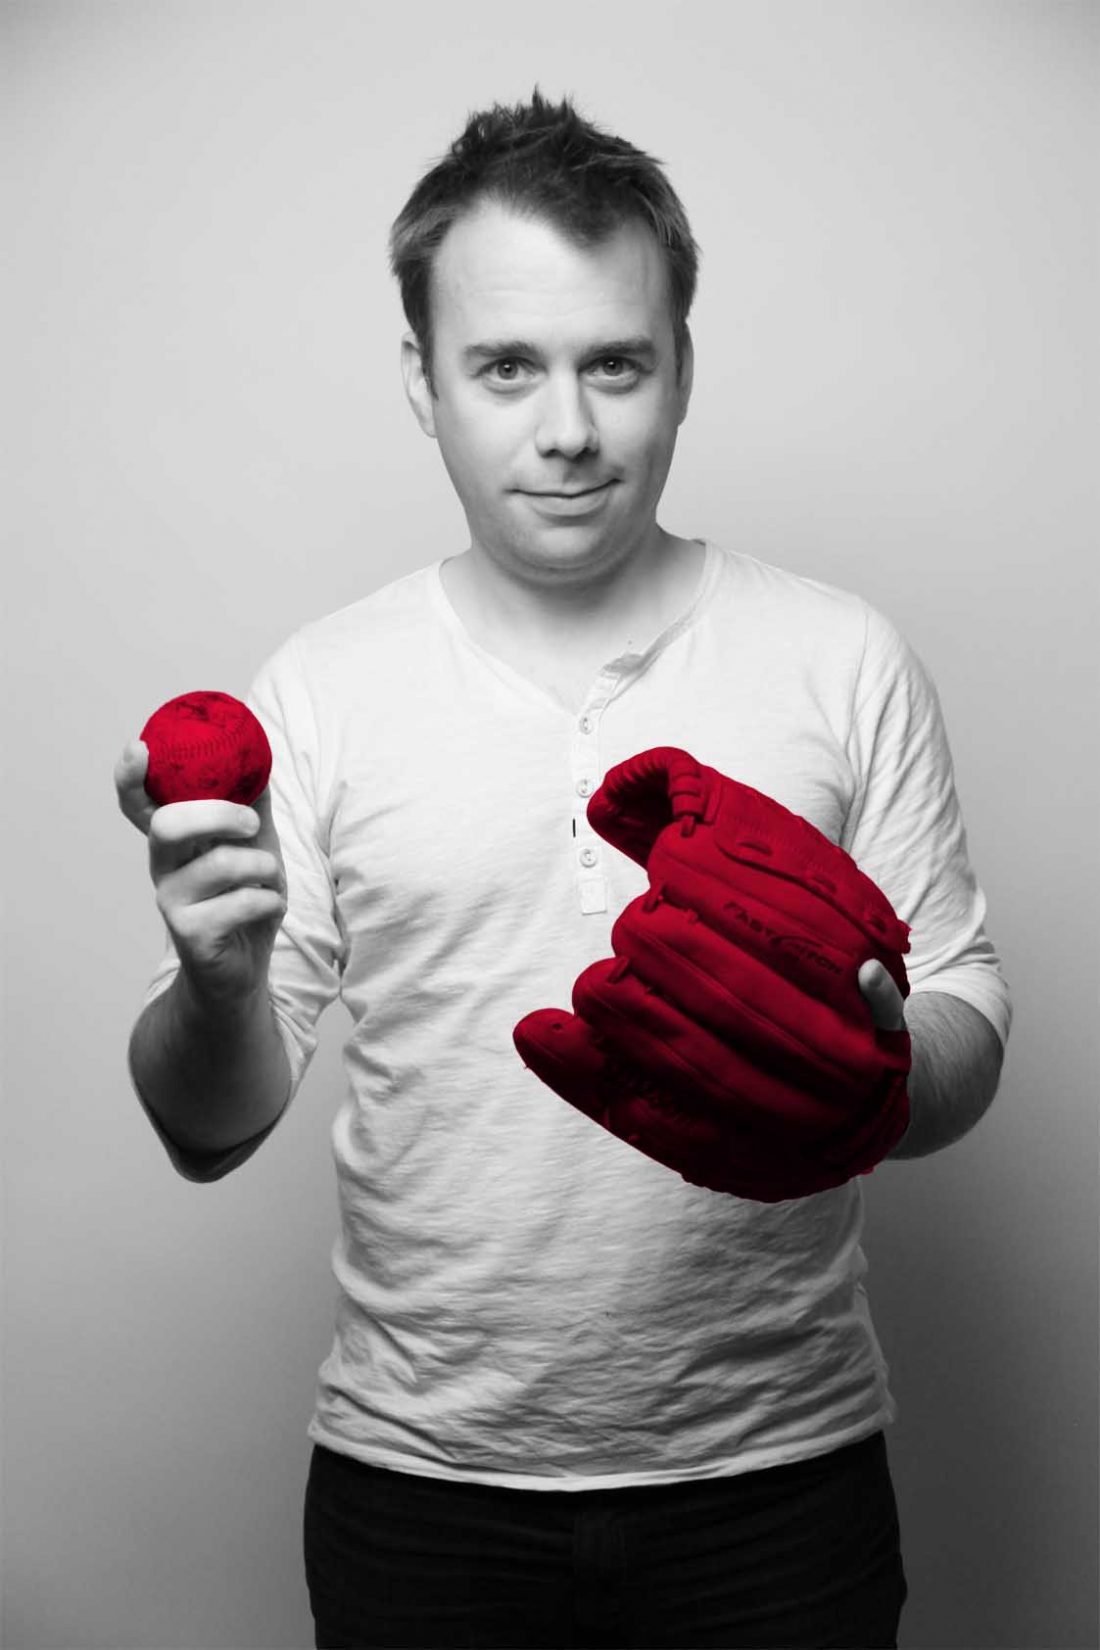 Image of Jeremy McCracken and his "q media red" baseball glove and ball. He is a lifelong fan of baseball.